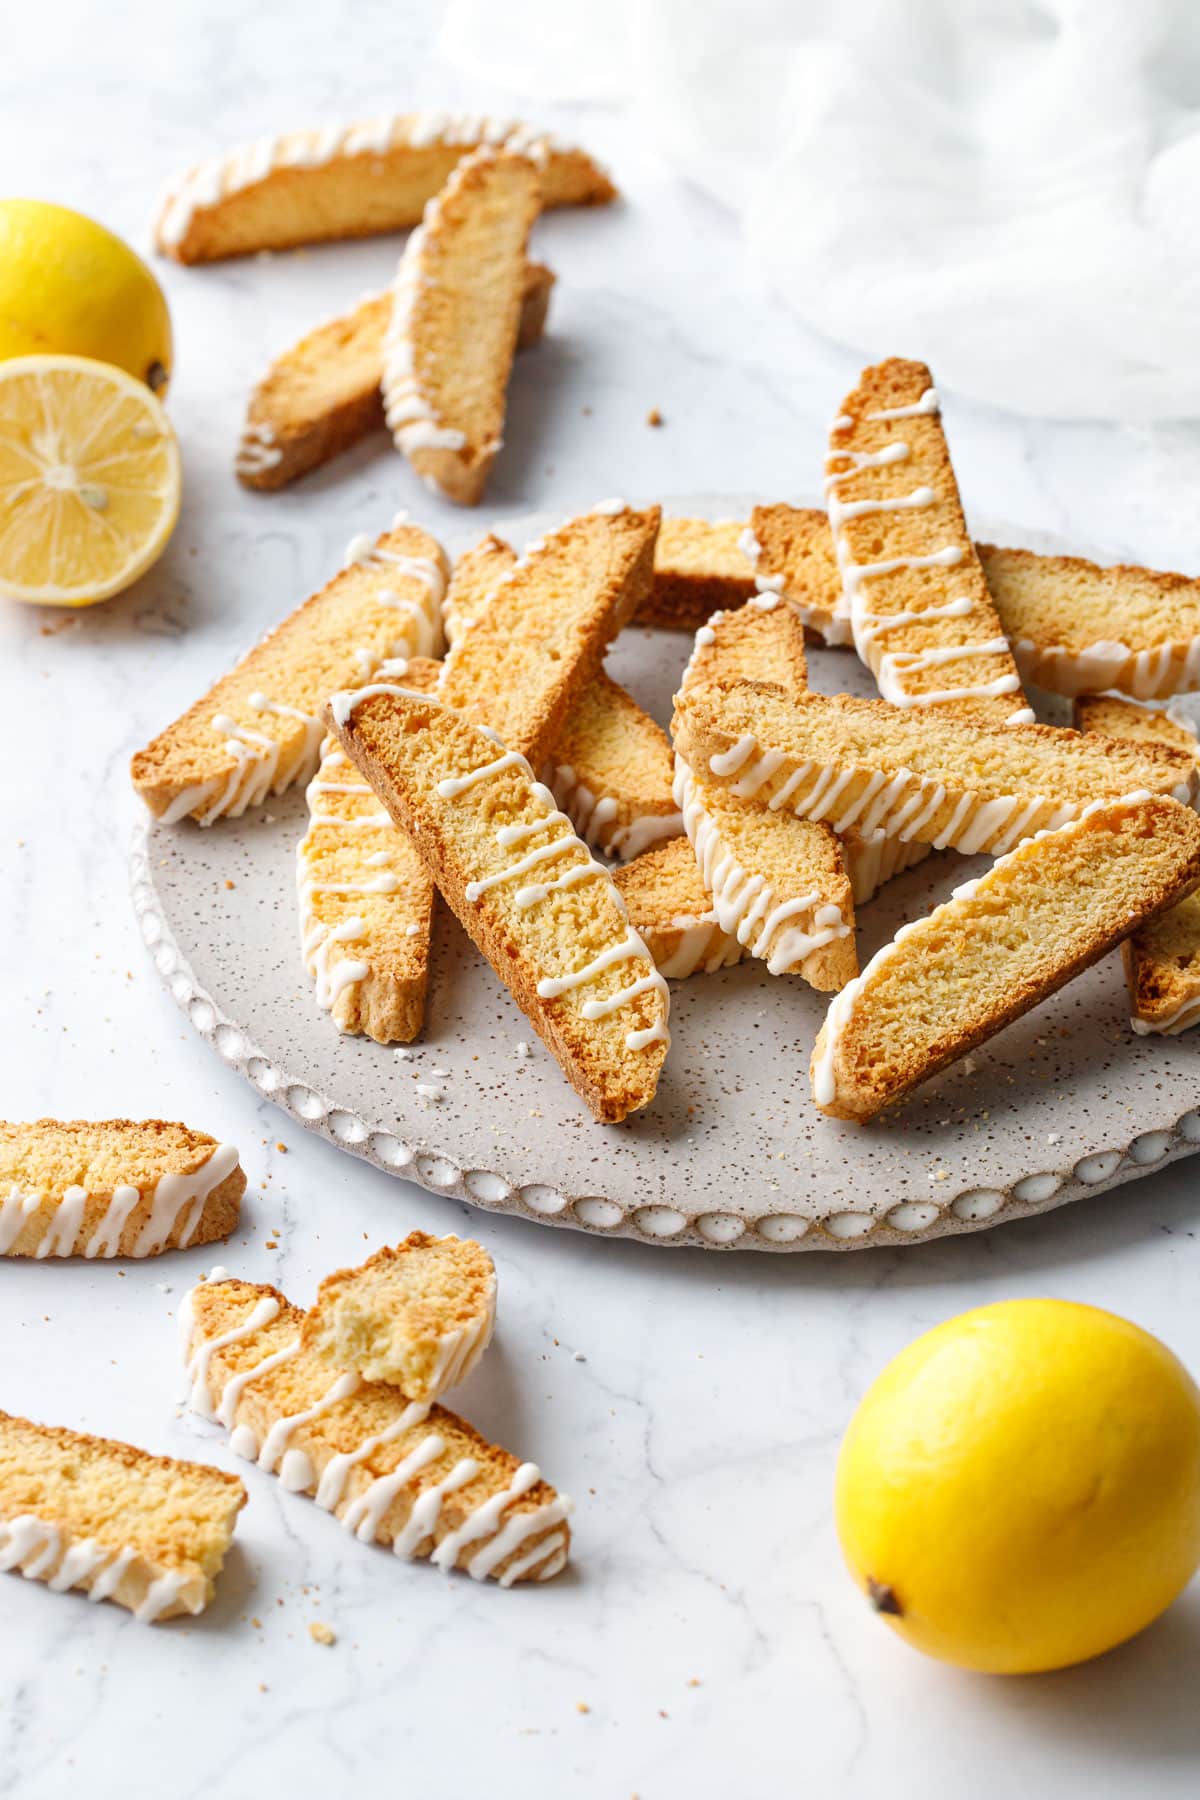 Flat plate with randomly arranged piles of Meyer Lemon Biscotti, with a few lemons (one cut) and a white napkin in the background.